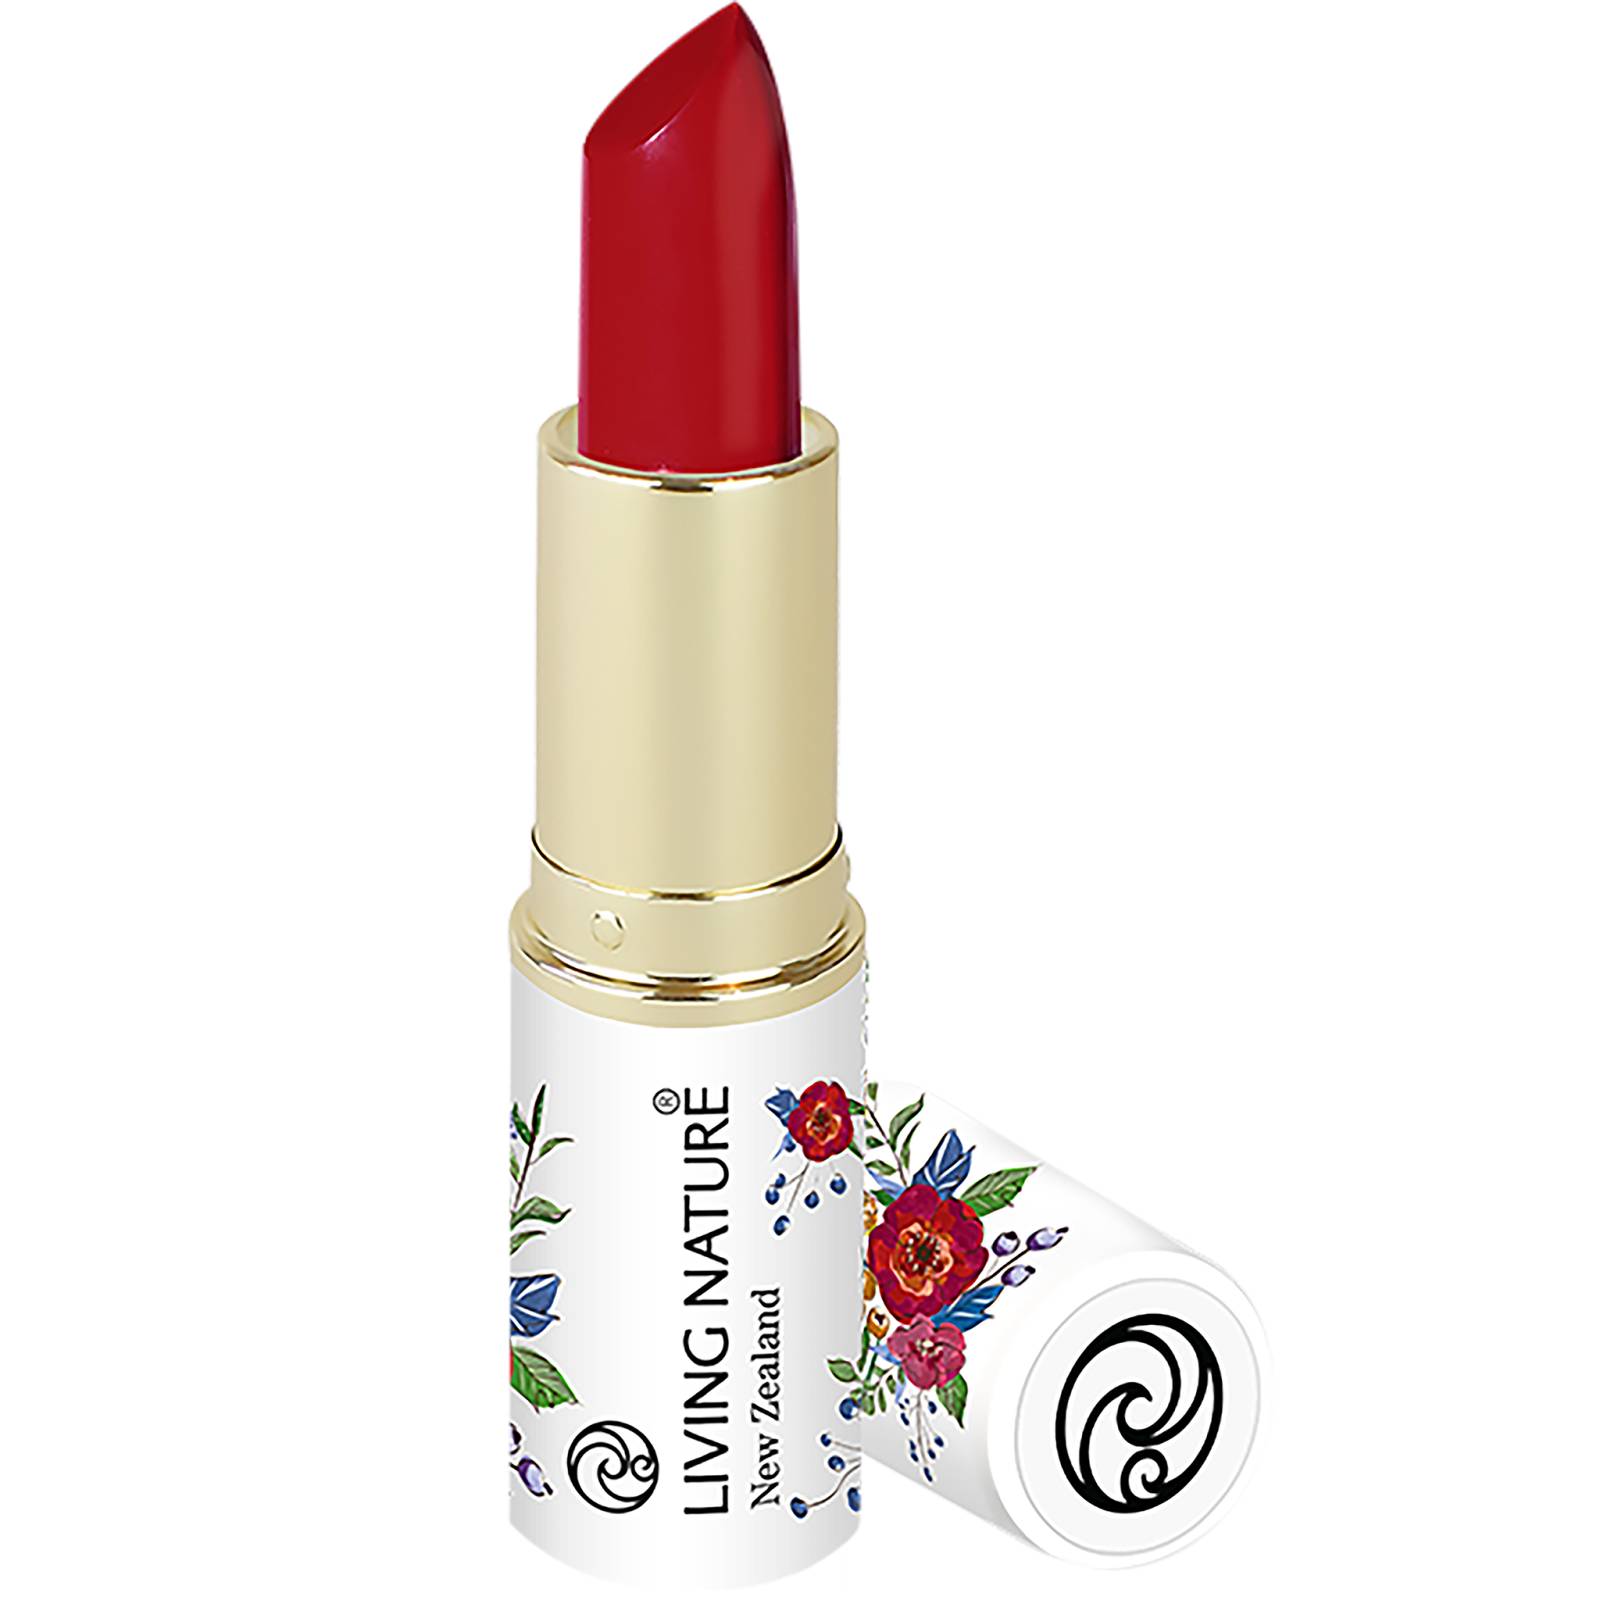 Living Nature Glamorous Lipstick - Limited Edition Floral Packaging 3.9g